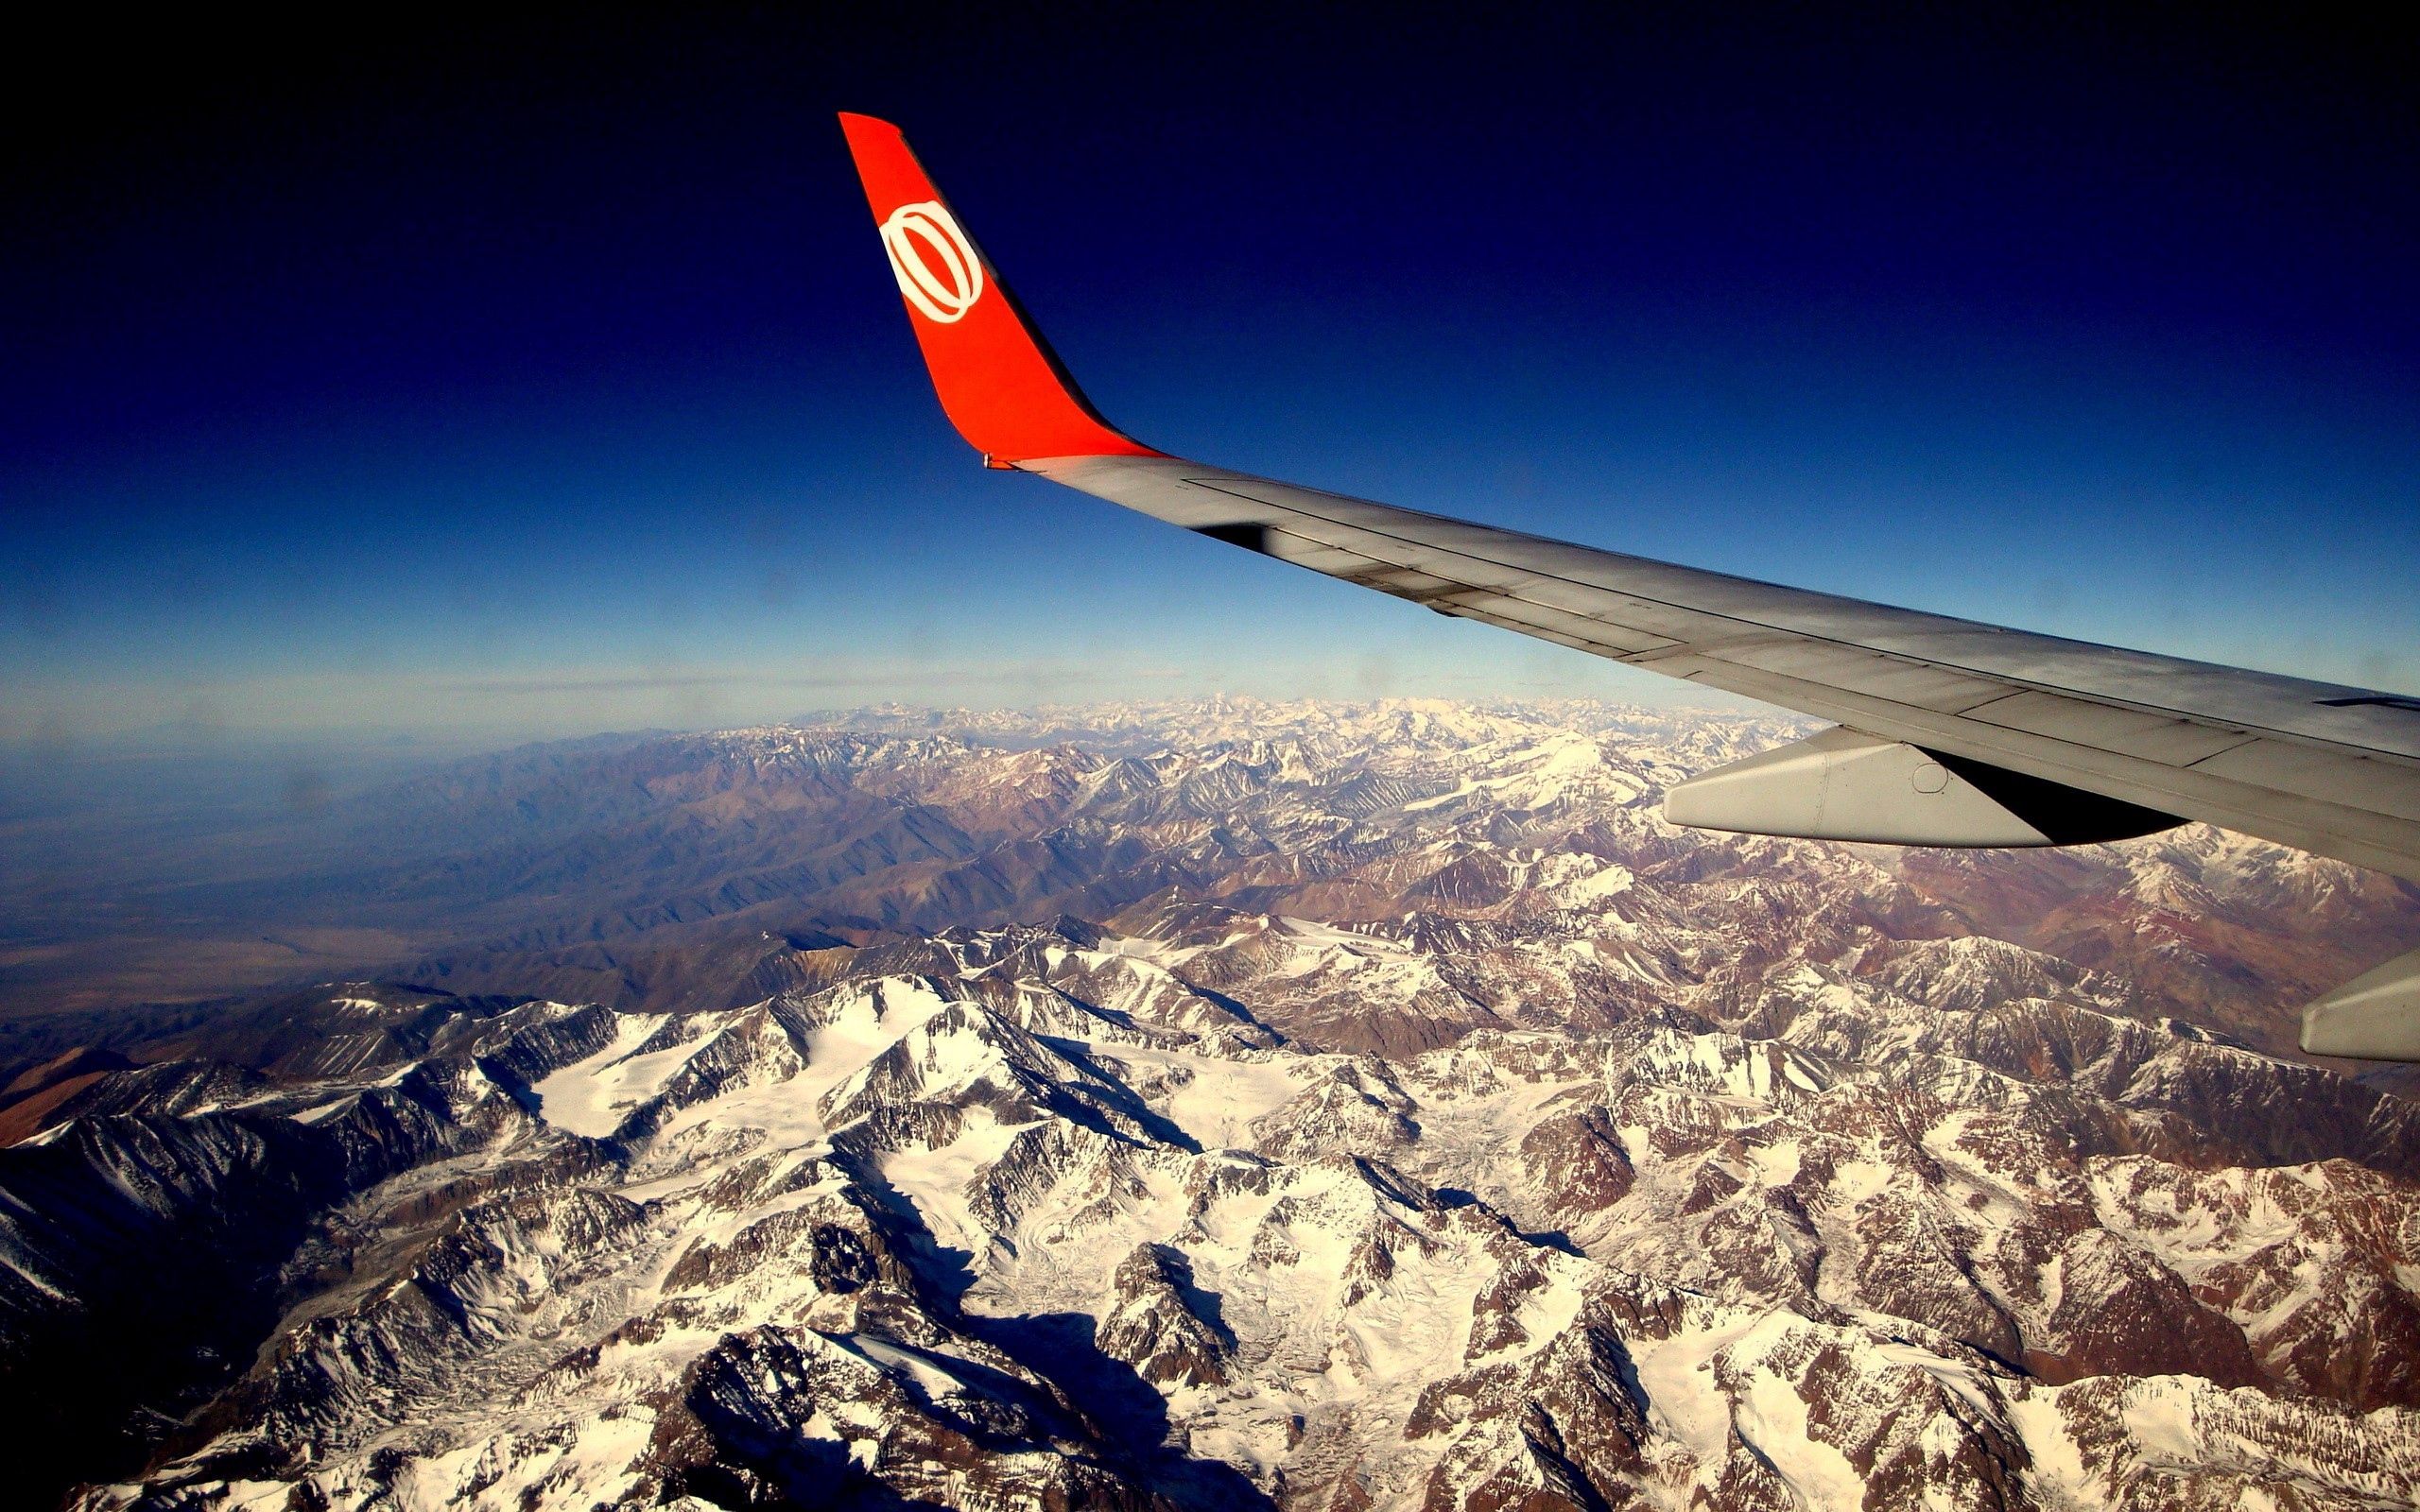 Free HD plane, nature, mountains, red, flight, height, wing, airplane, ridge, spine